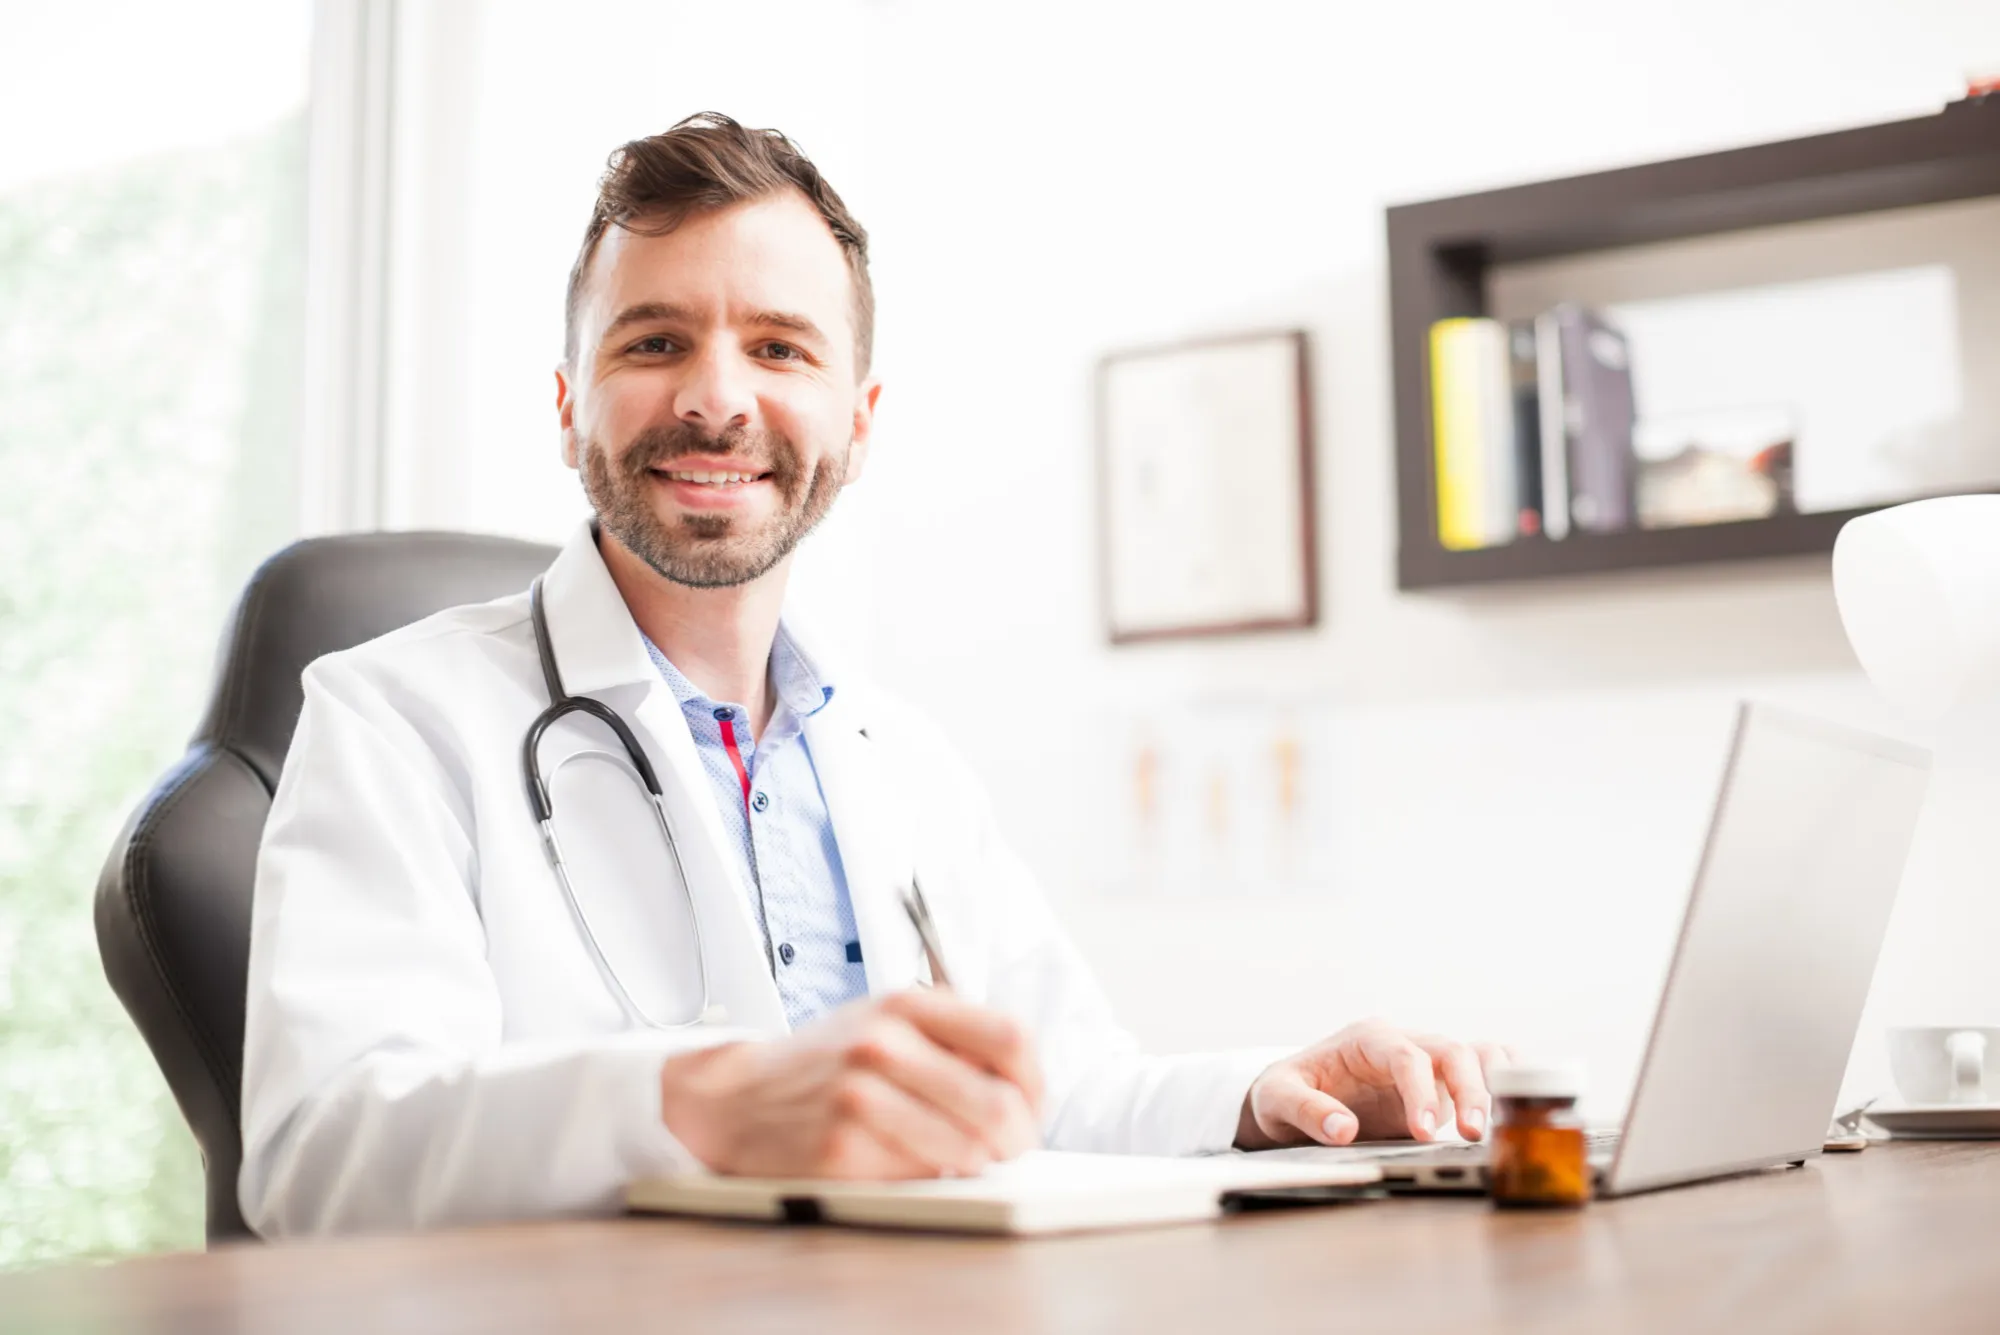 How to Become a Healthcare Administrator